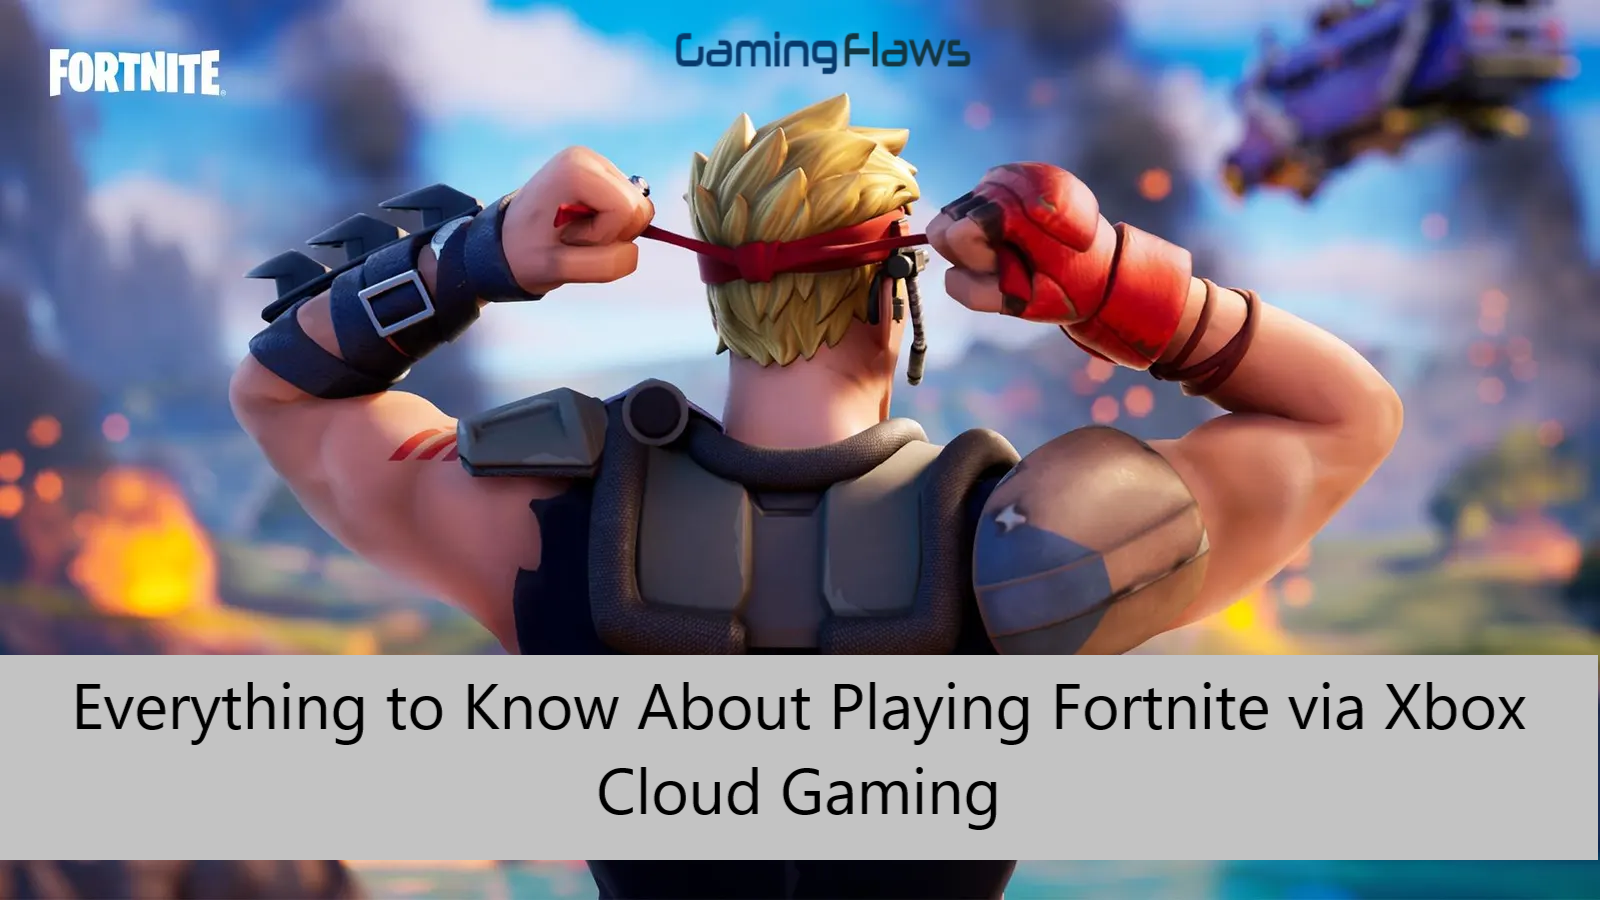 Everything to Know About Playing Fortnite via Xbox Cloud Gaming